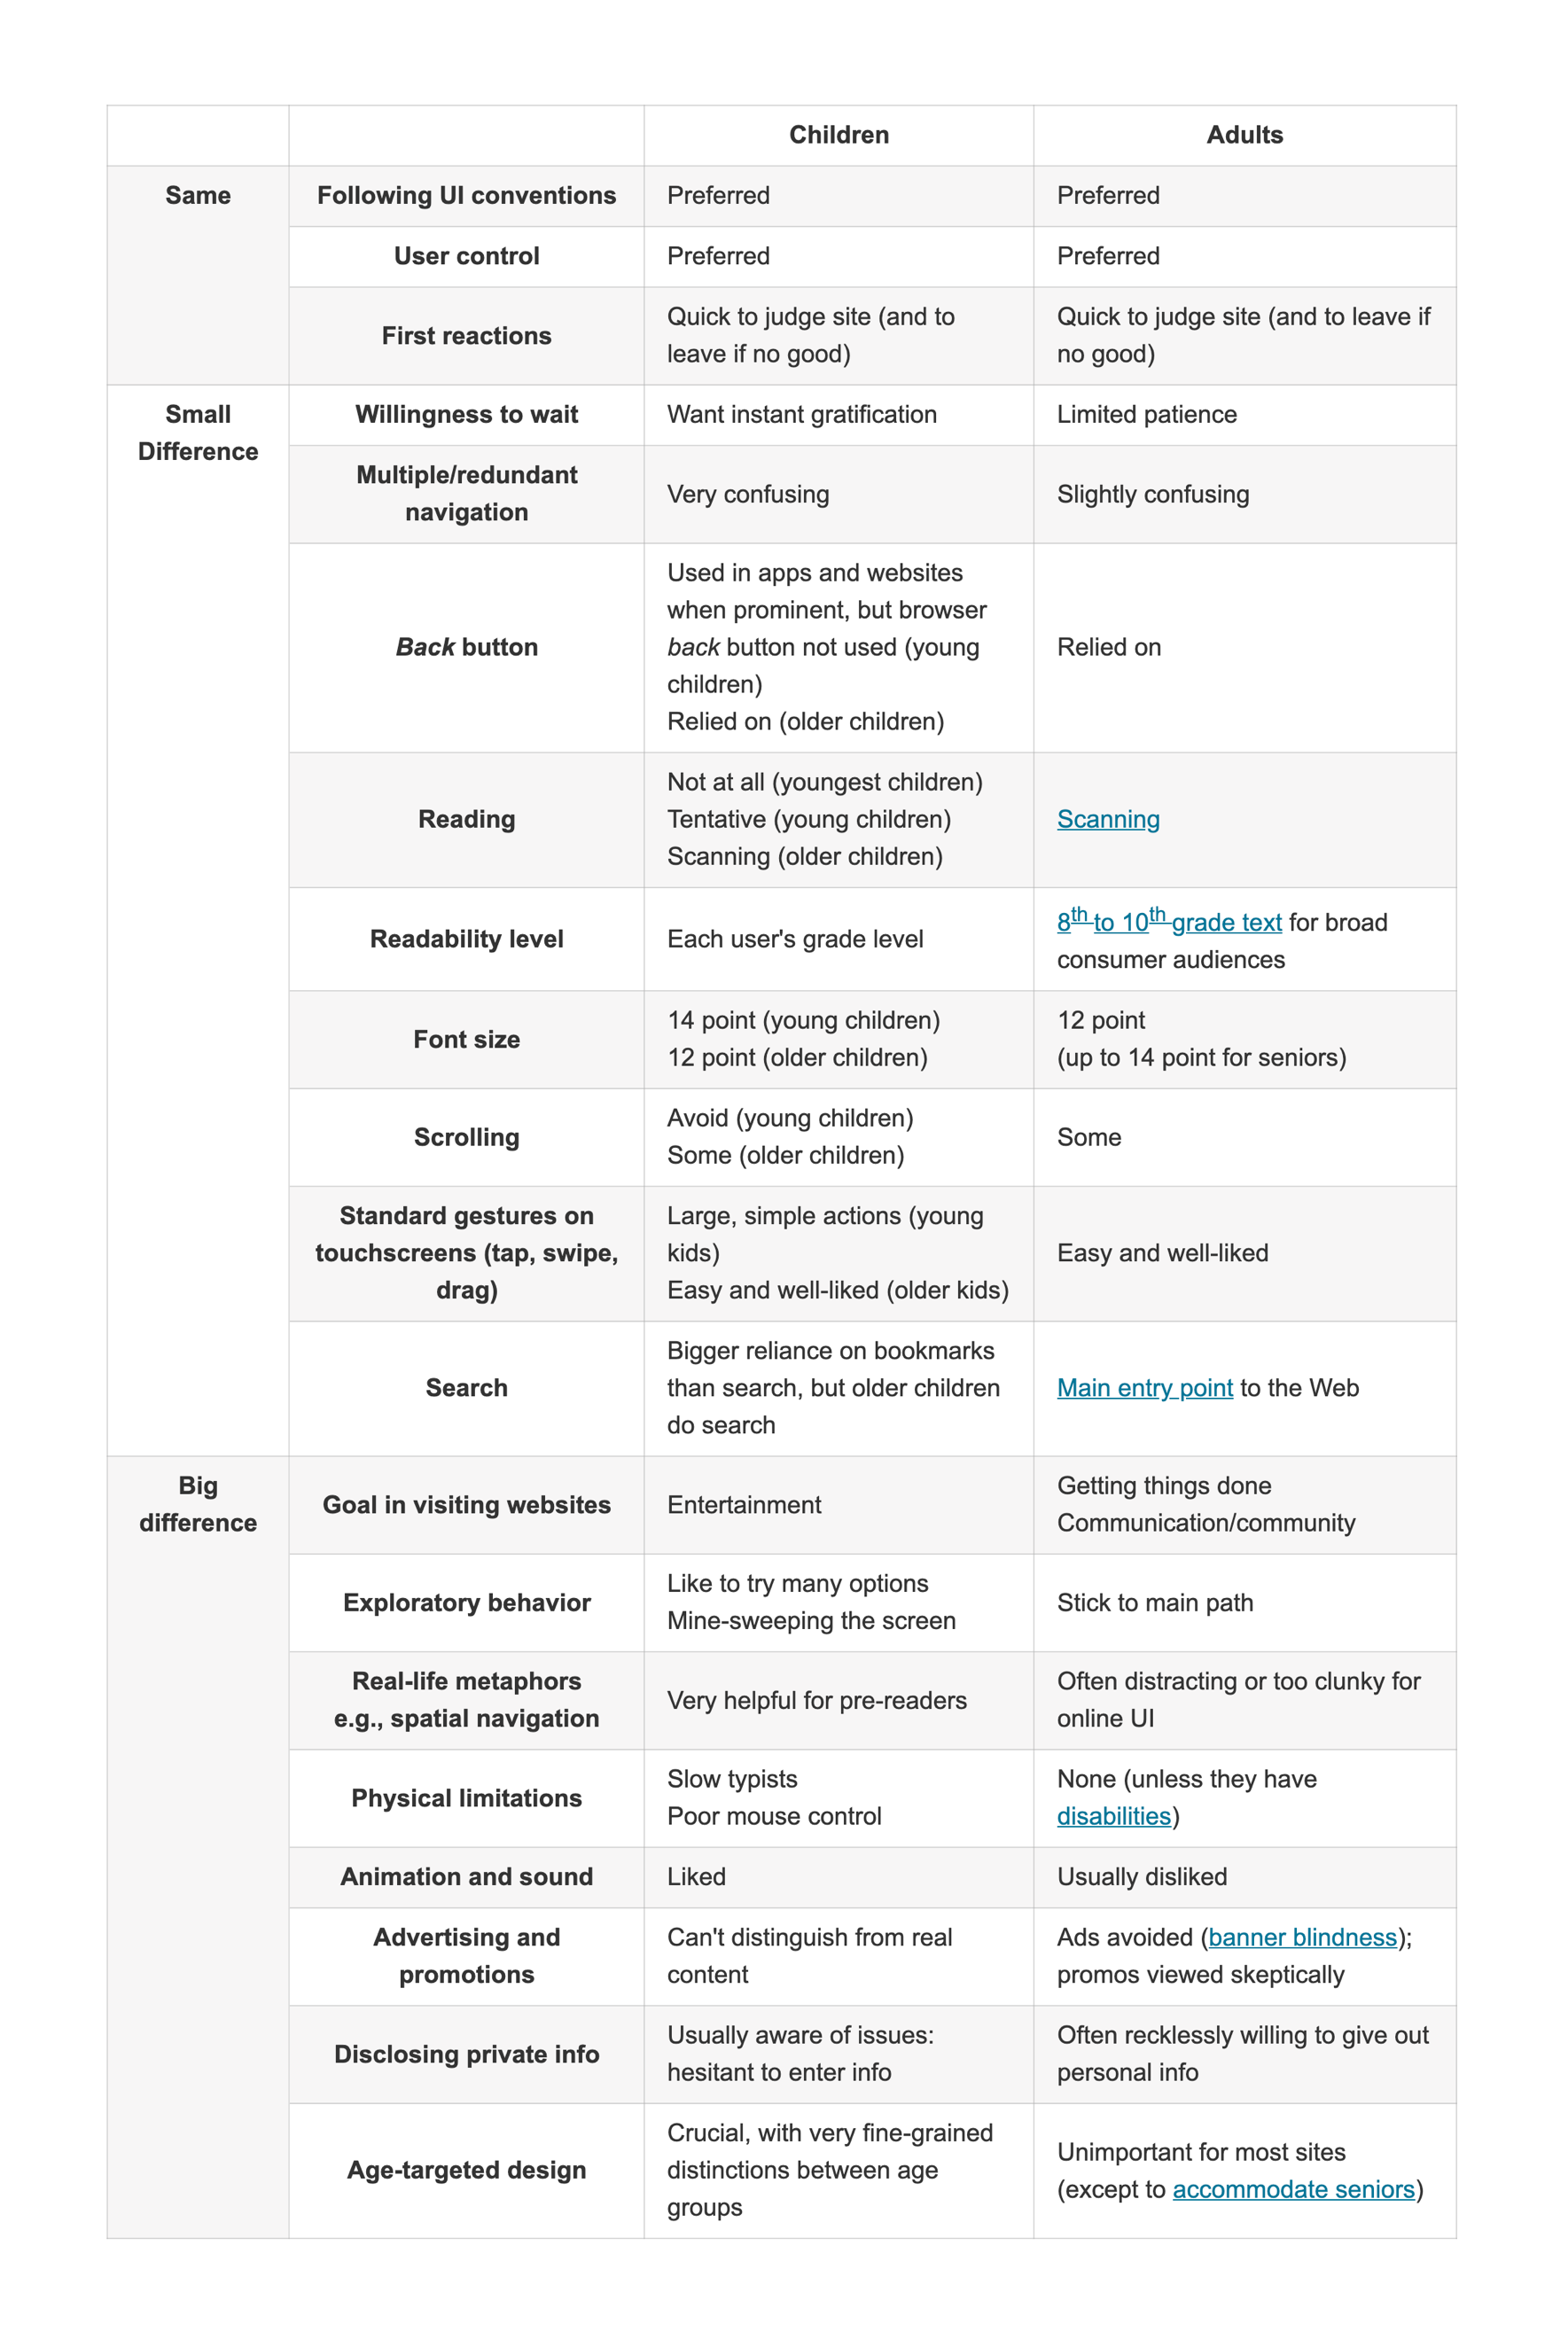 Table outlining the differences between designing for children and adults